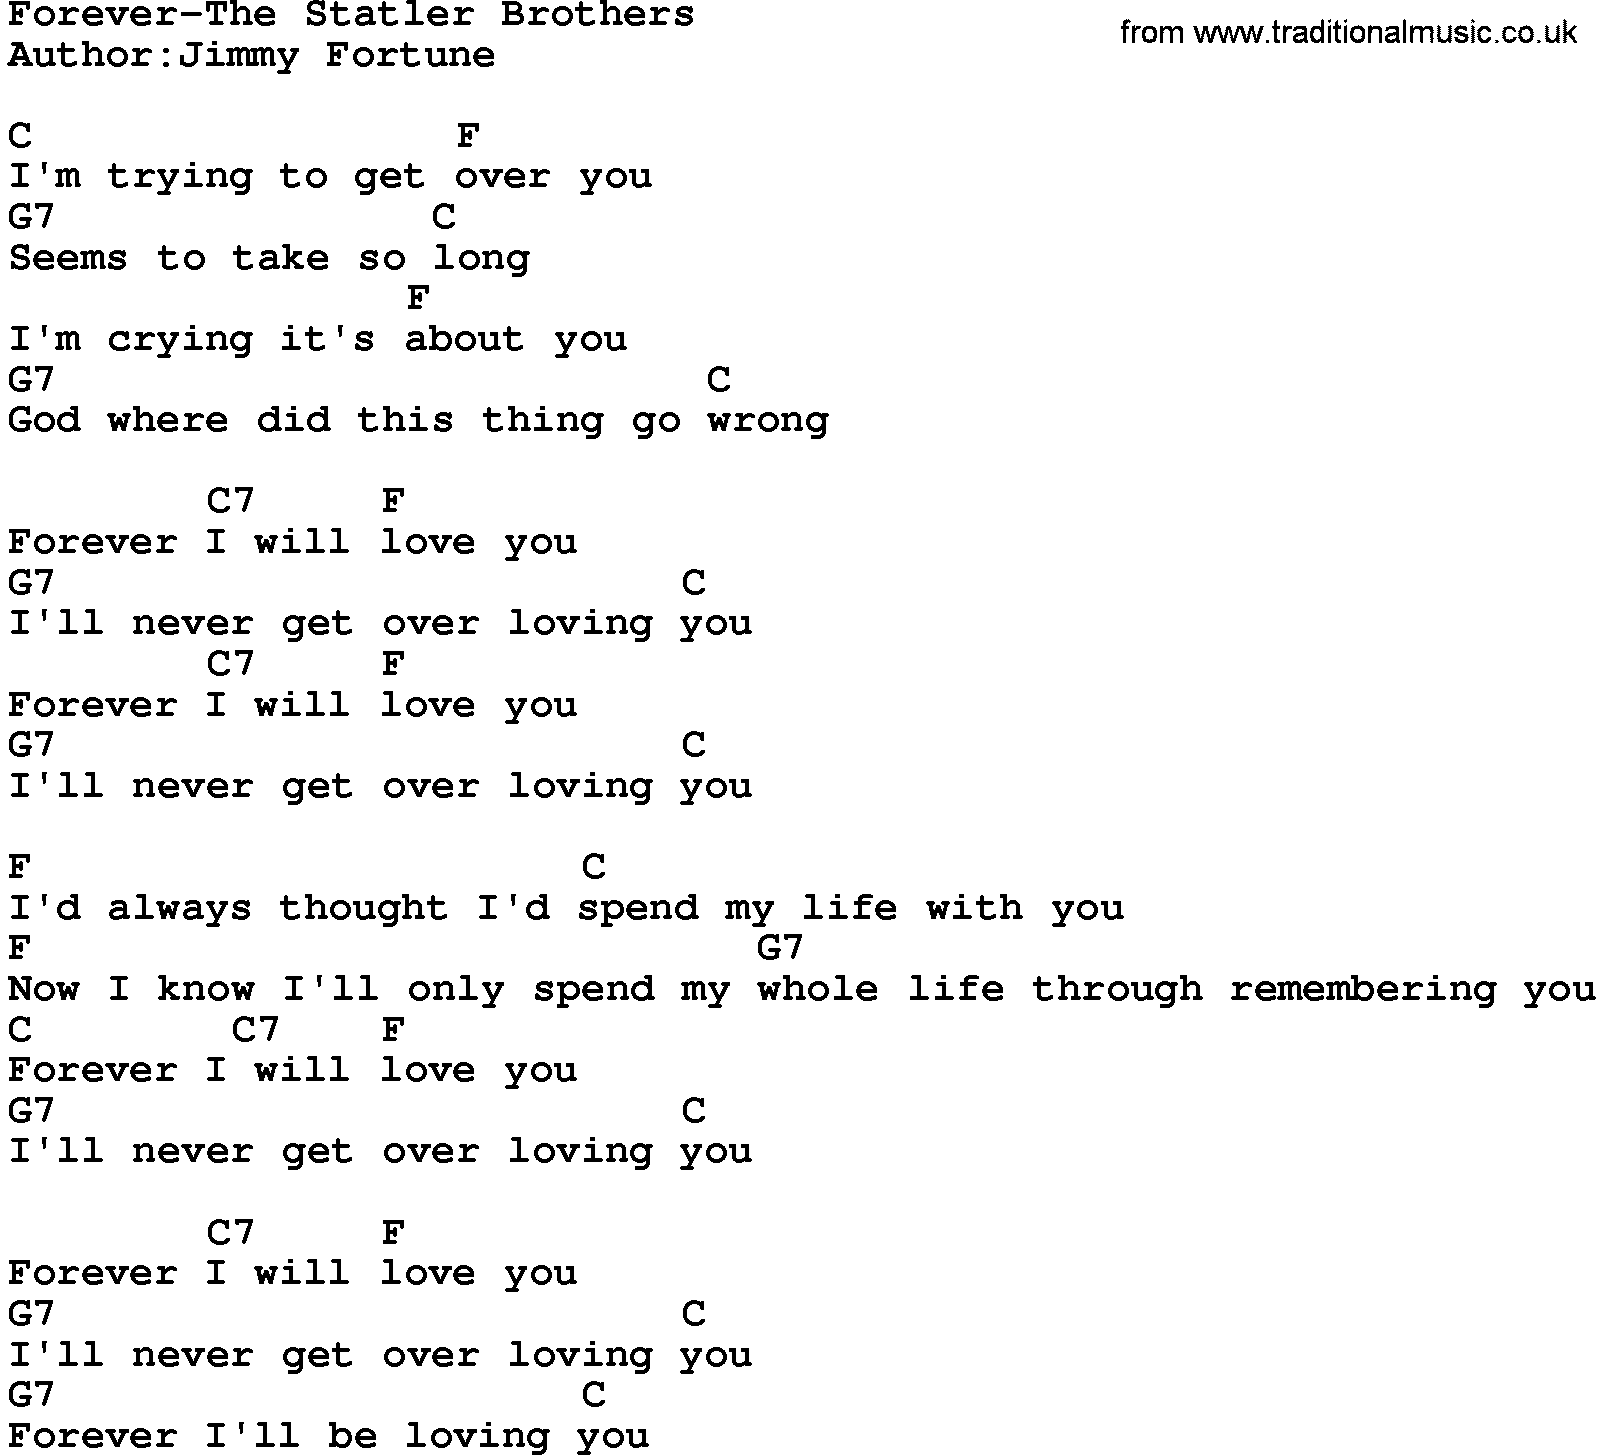 Country music song: Forever-The Statler Brothers lyrics and chords